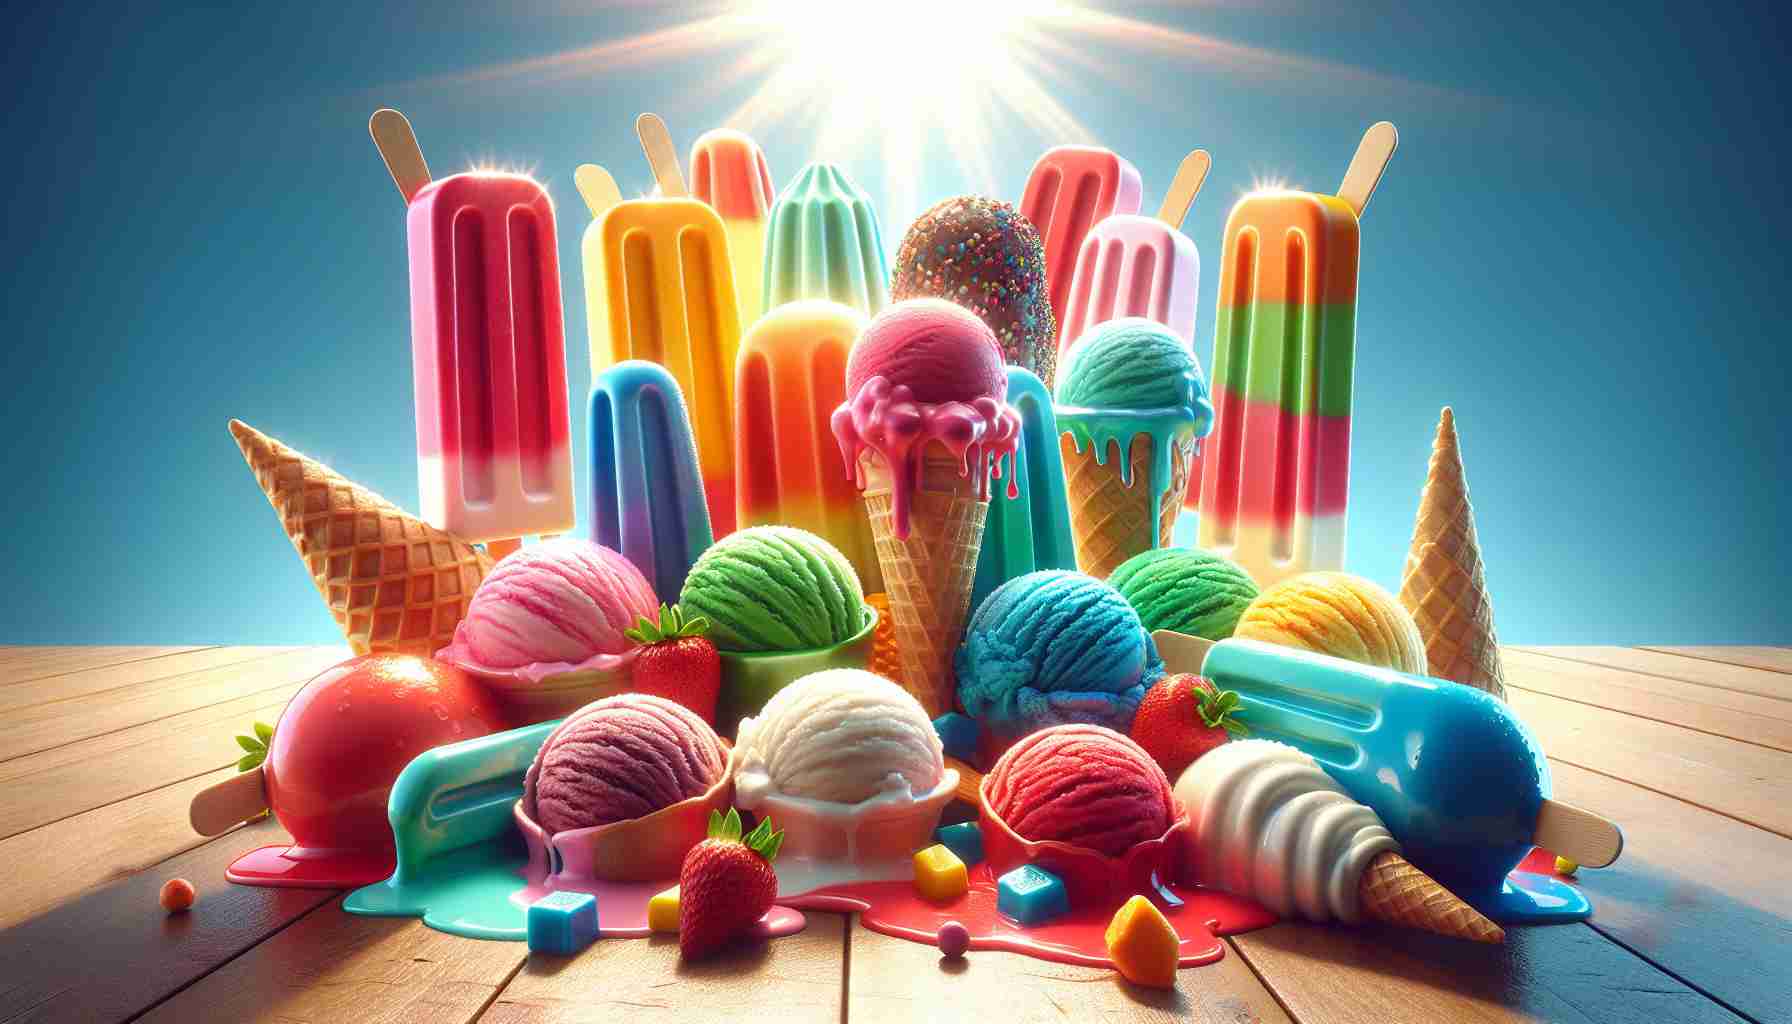 High definition, realistic image featuring an array of vibrant, colorful ice-cream delights. Be sure to depict various frozen treats preferred during summer days, such as cones, popsicles, and bowls, each beaming with radiant shades of colors to signify their diverse flavors, ranging from intense red strawberry to soothing blue mint. Position them against a backdrop of a bright sunny day, casting a playful shadow, accentuating the energy and joy of summer. Show the ice cream melting slightly under the hot sun to highlight the heat, epitomizing the spectacular contrast of cold sweet treats amidst the sweltering summer heat.